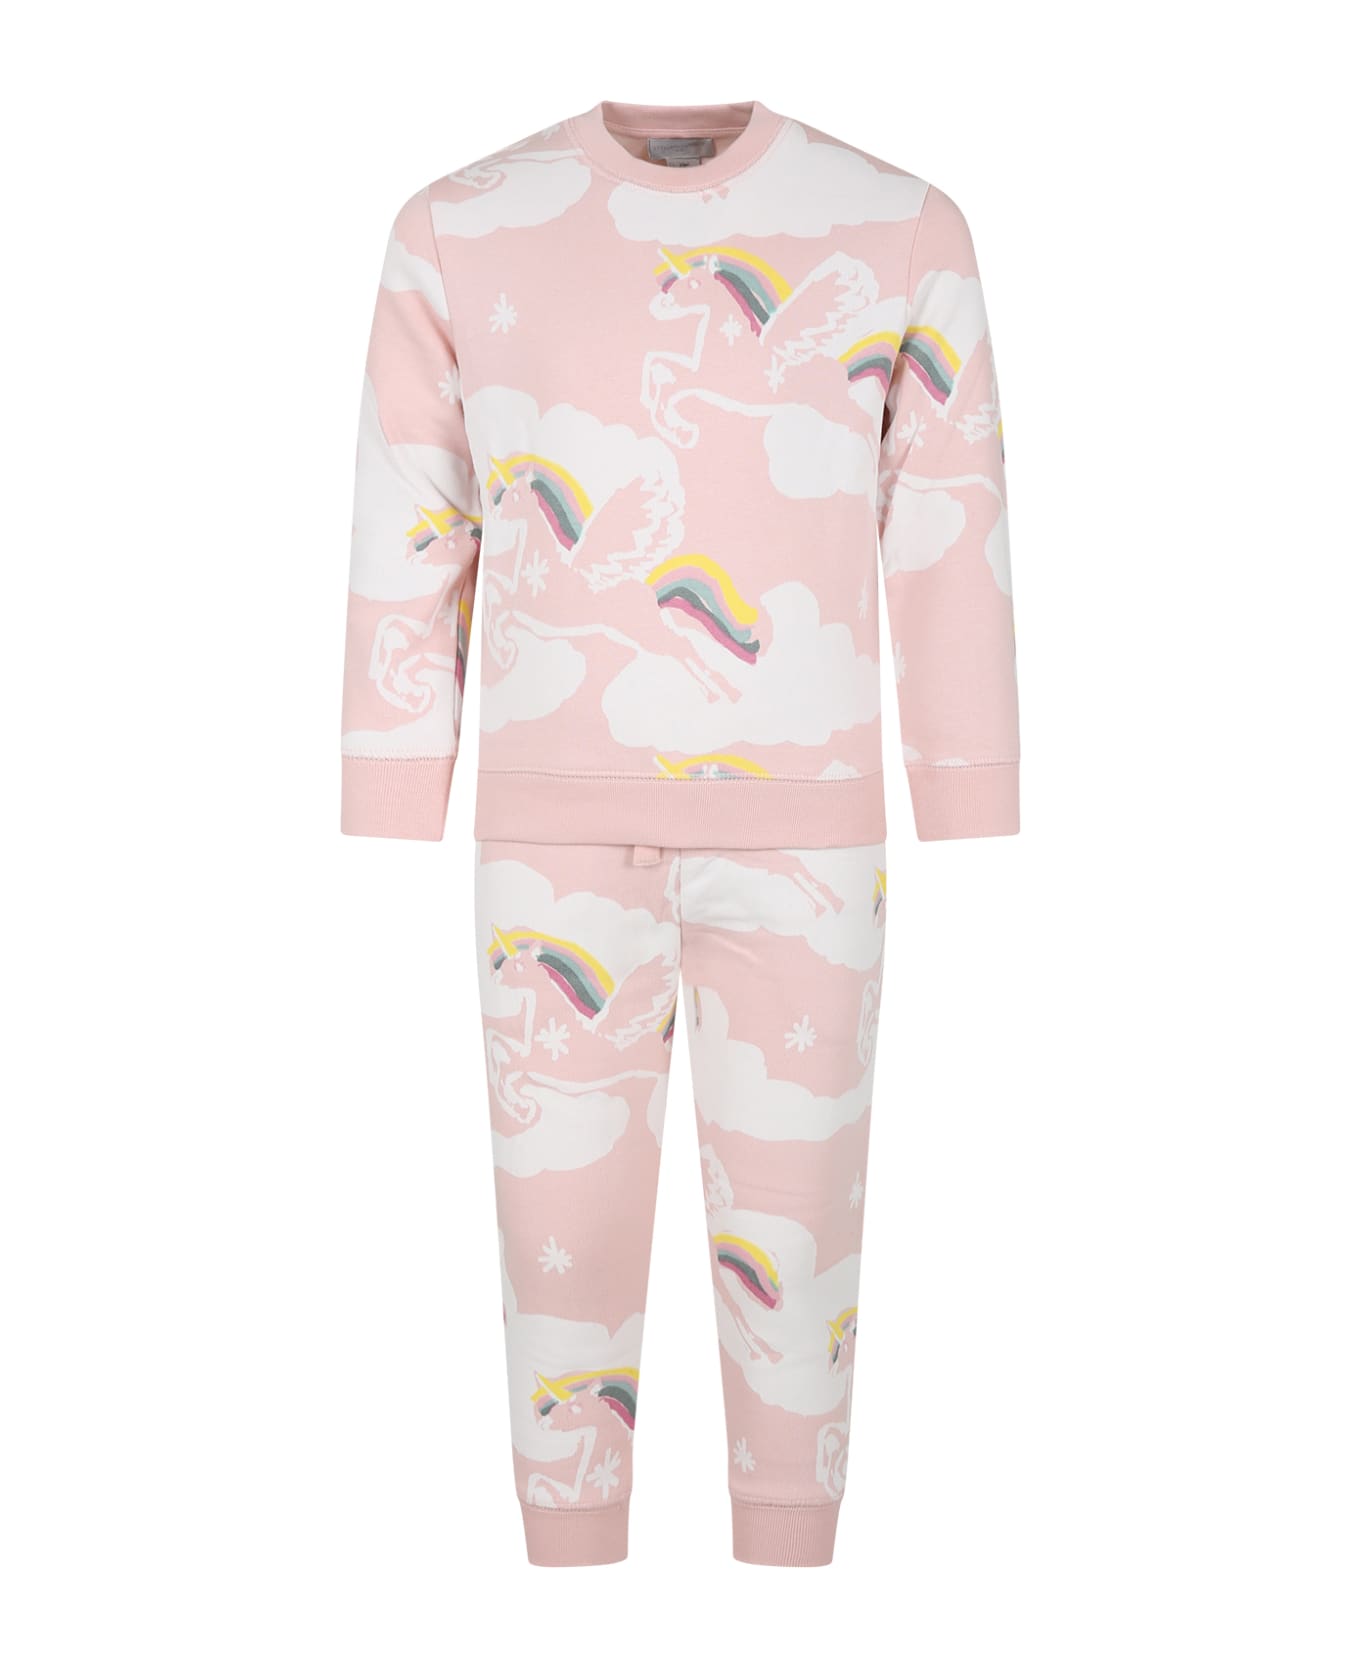 Stella McCartney Kids Pink Suit For Girl With Unicorn - Pink